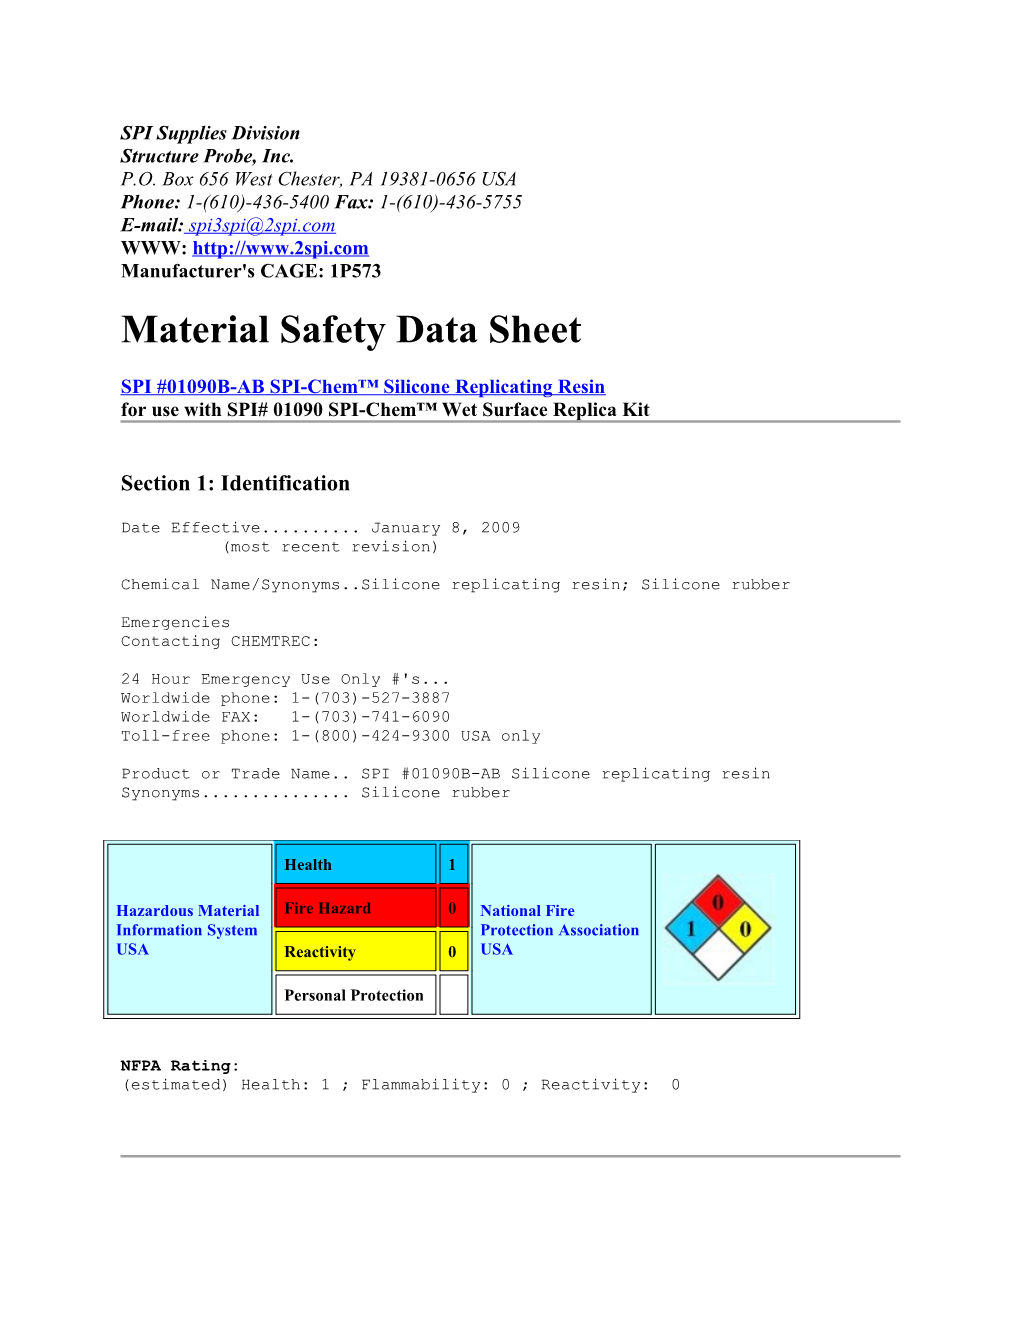 Material Safety Data Sheet s139